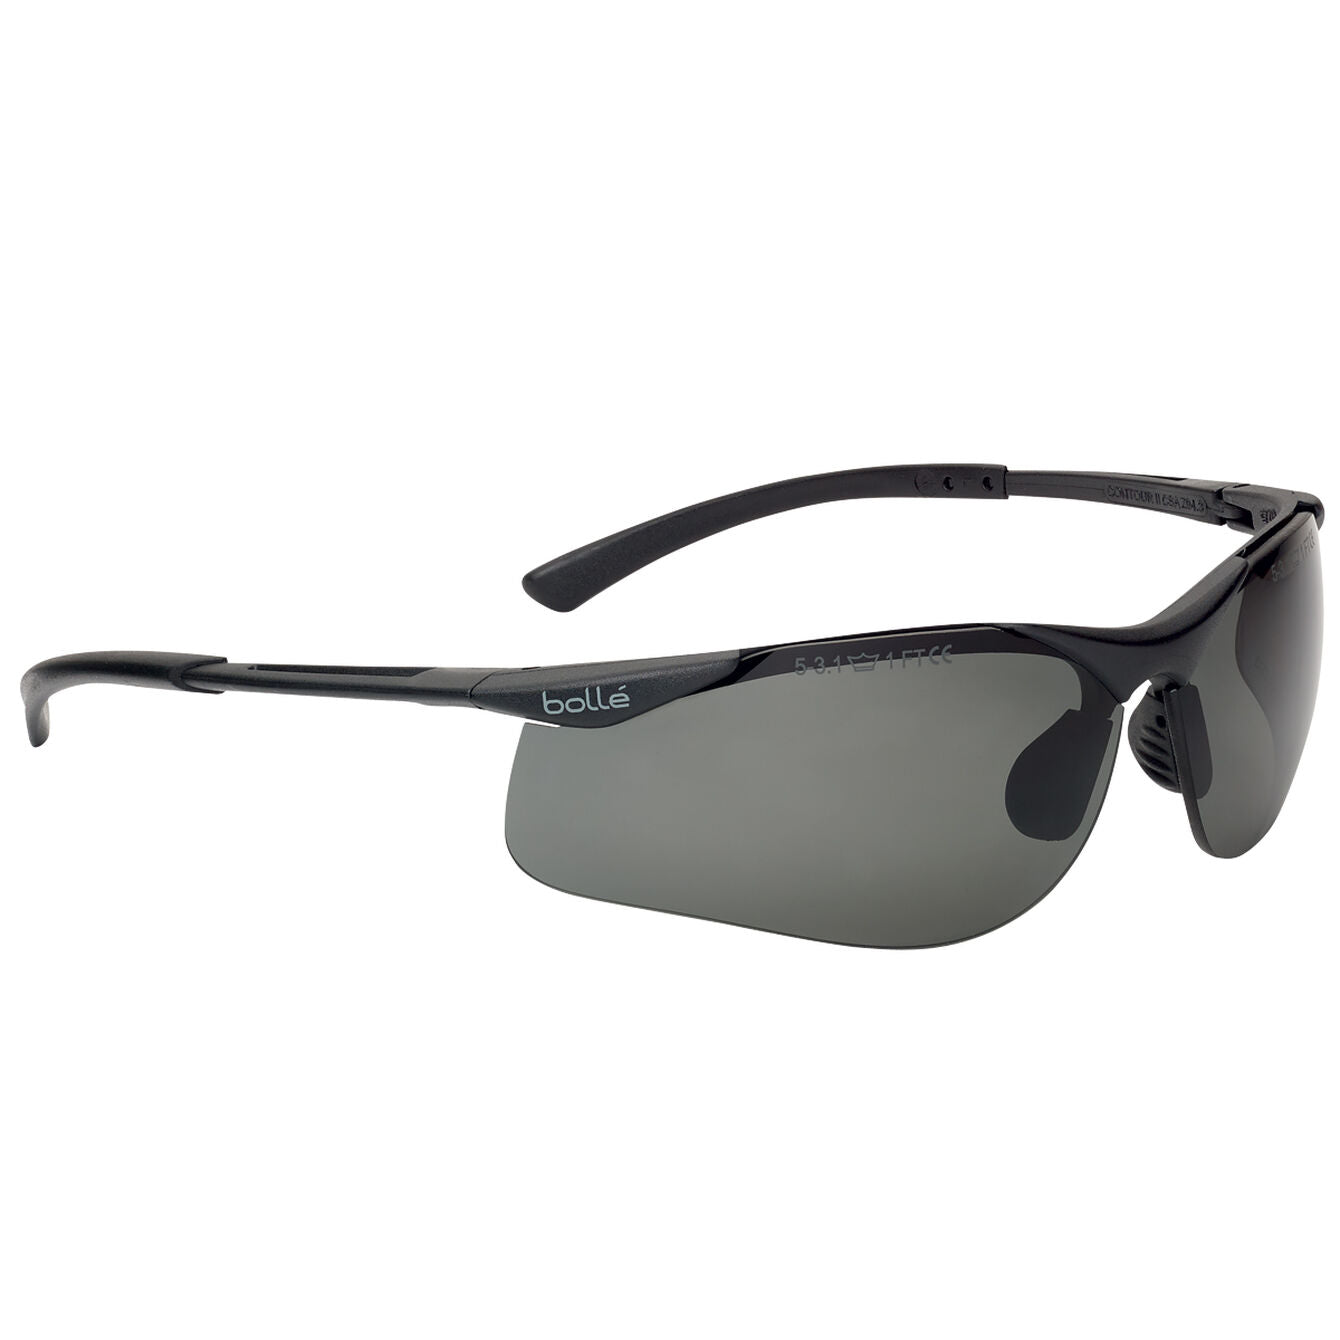 Bolle CONTOUR II BSSI Smoke Lens Safety Glasses